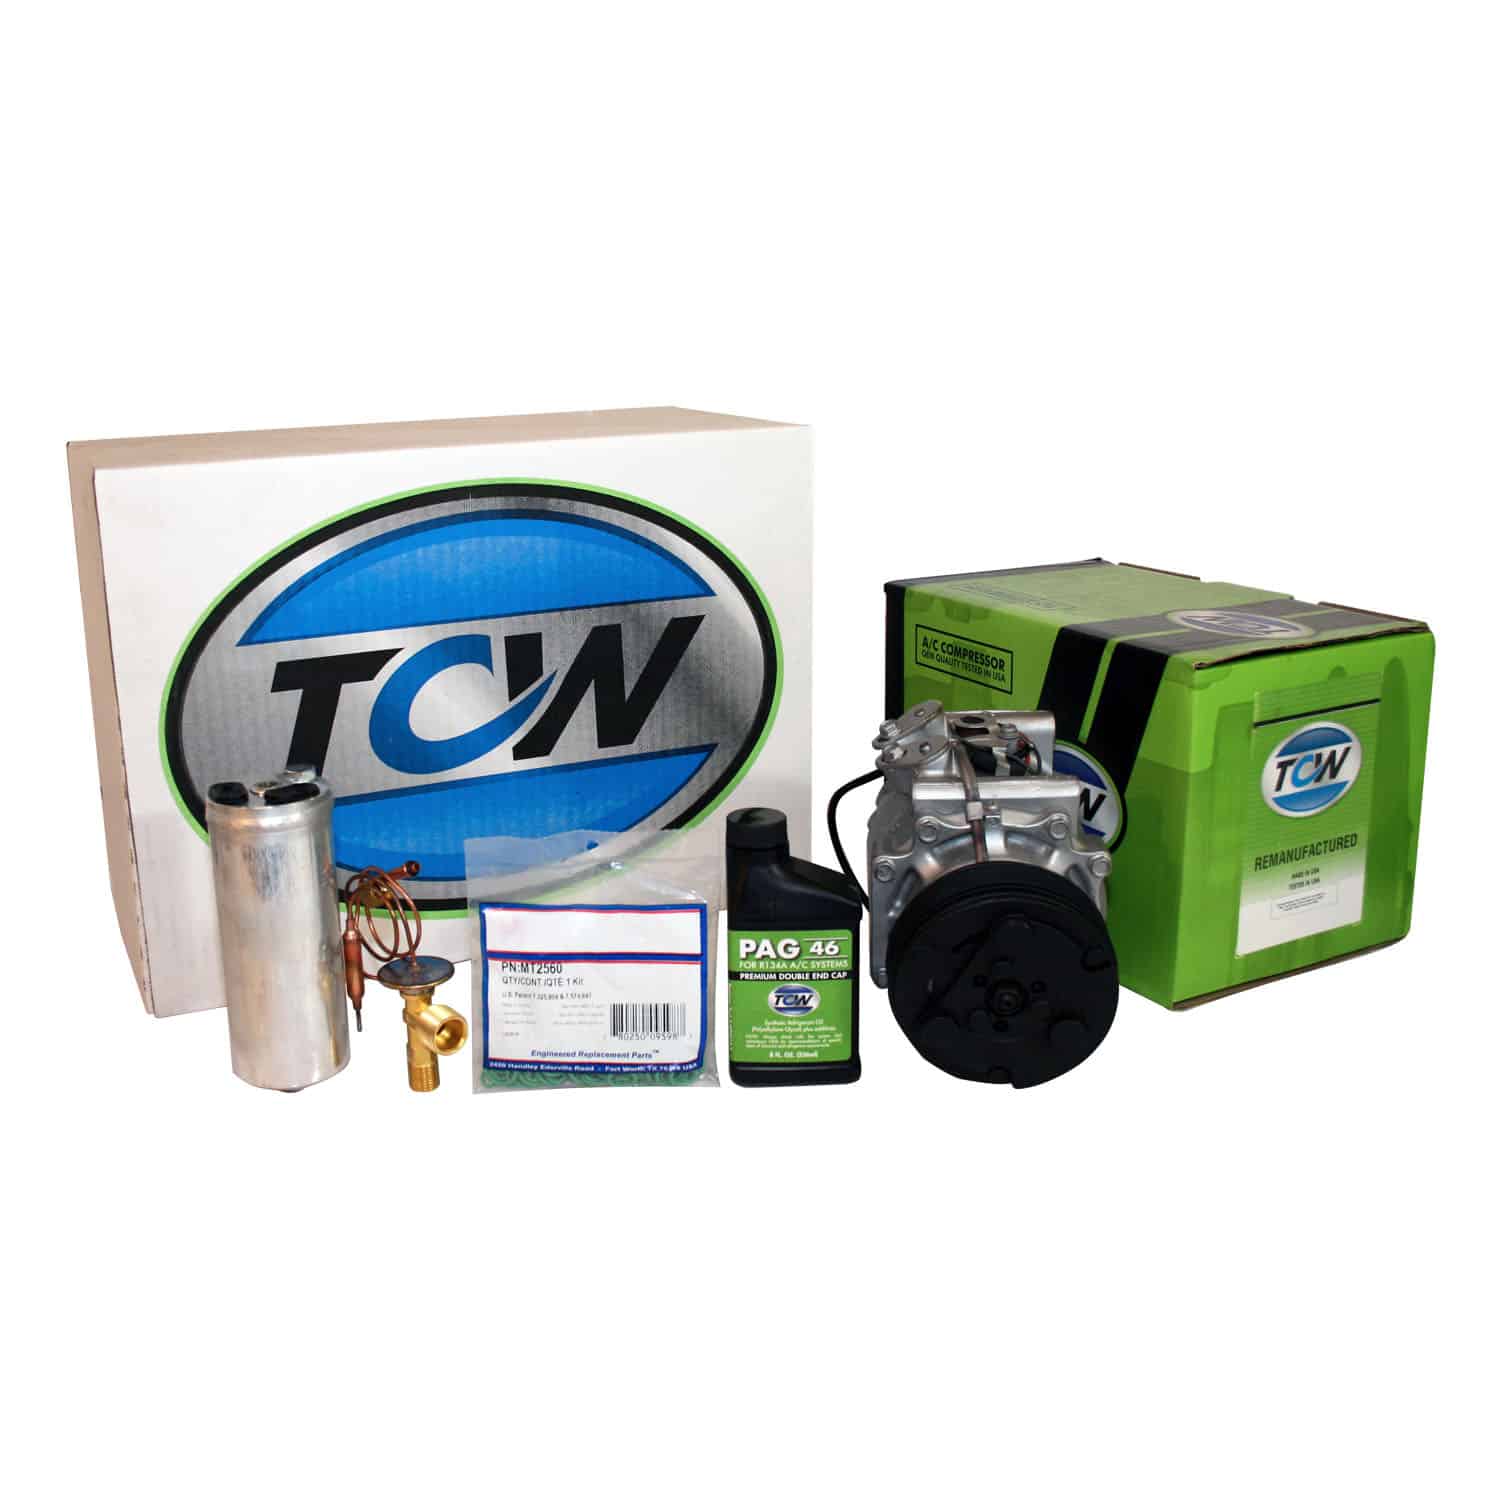 TCW Vehicle A/C Kit K1000306R Remanufactured Product Image field_60b6a13a6e67c